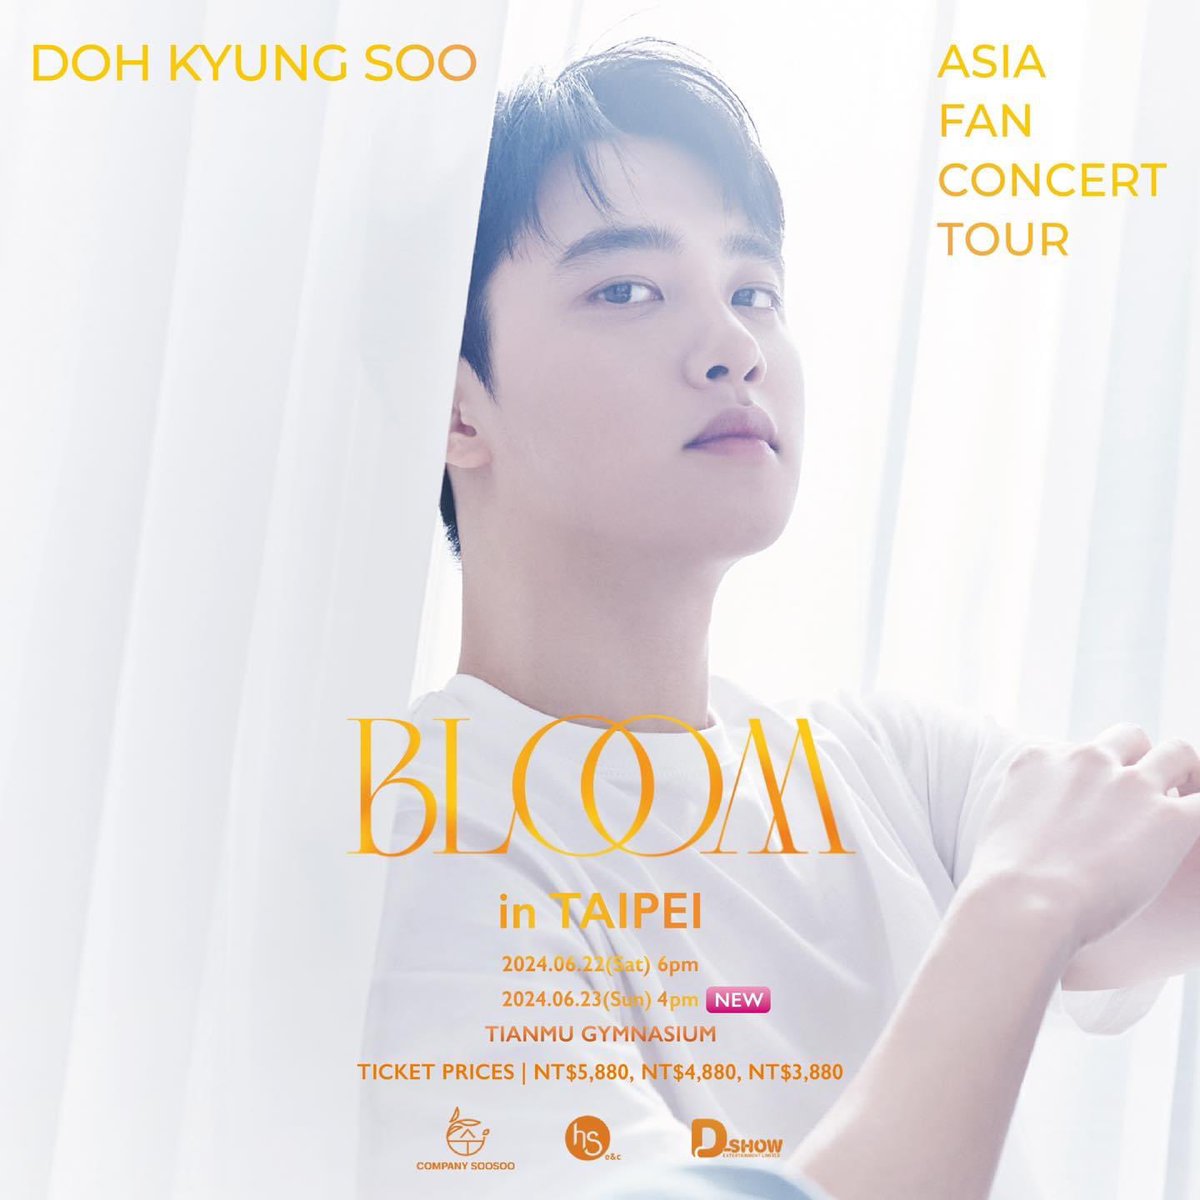 Doh Kyungsoo BLOOM in Taipei +) additional day!!!!!! June 23